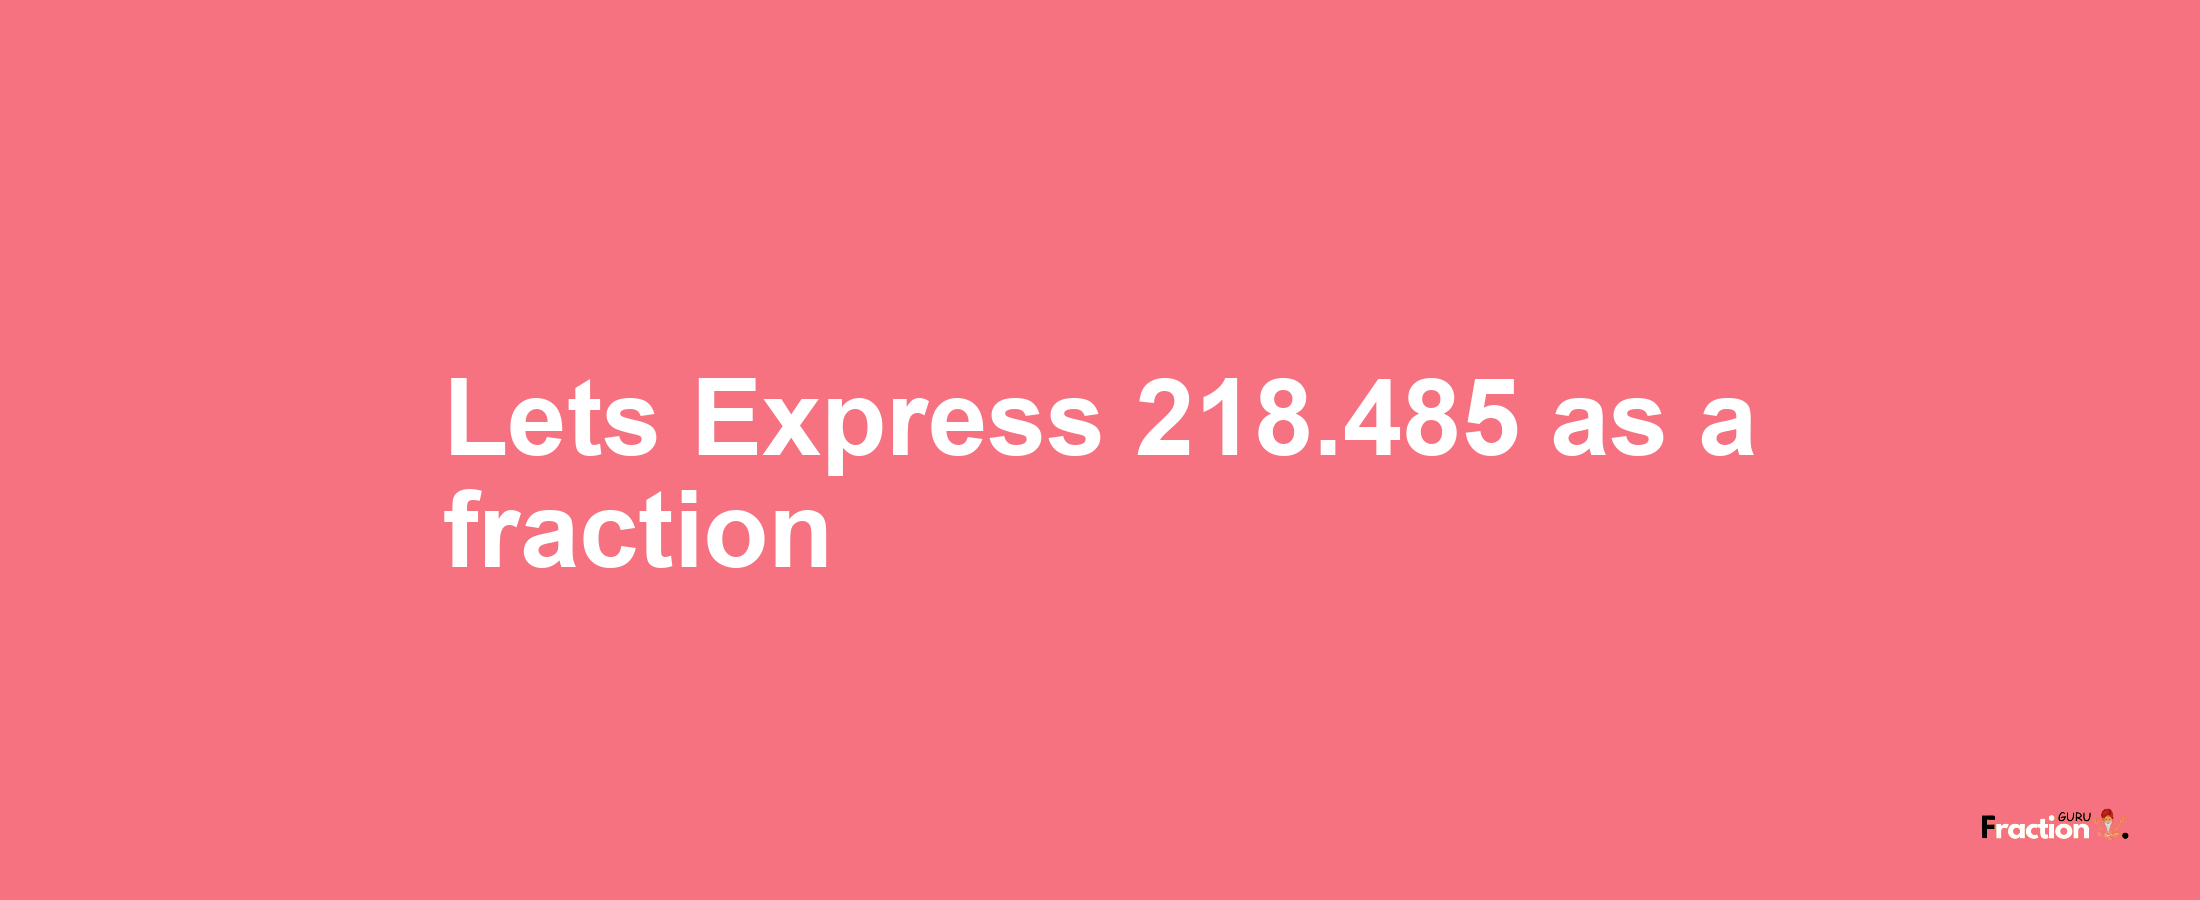 Lets Express 218.485 as afraction